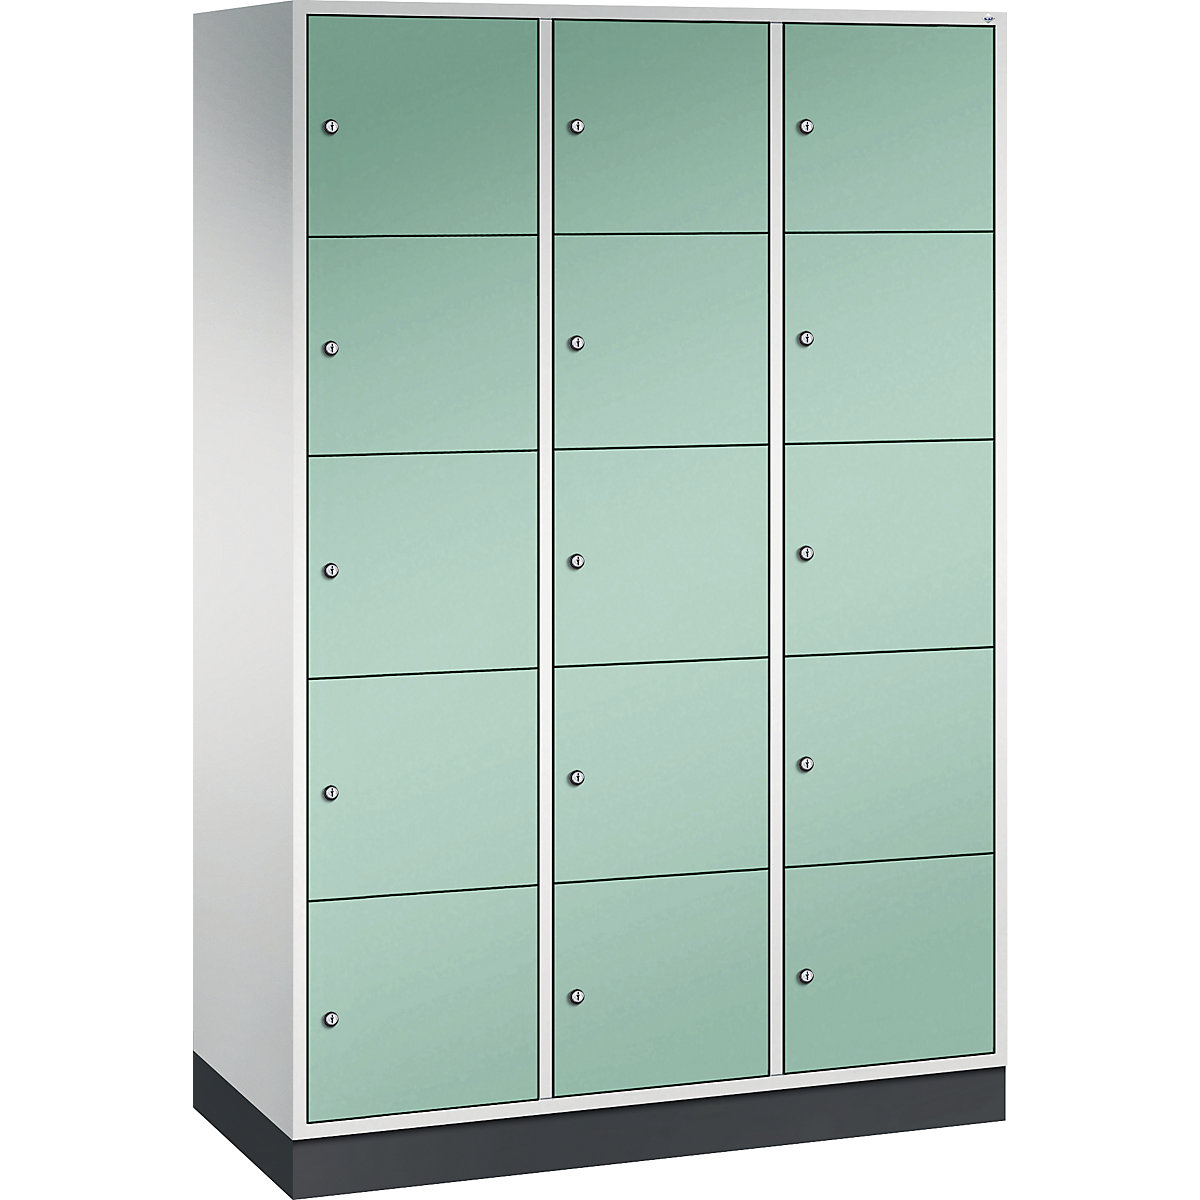 INTRO steel compartment locker, compartment height 345 mm – C+P, WxD 1220 x 500 mm, 15 compartments, light grey body, light green doors